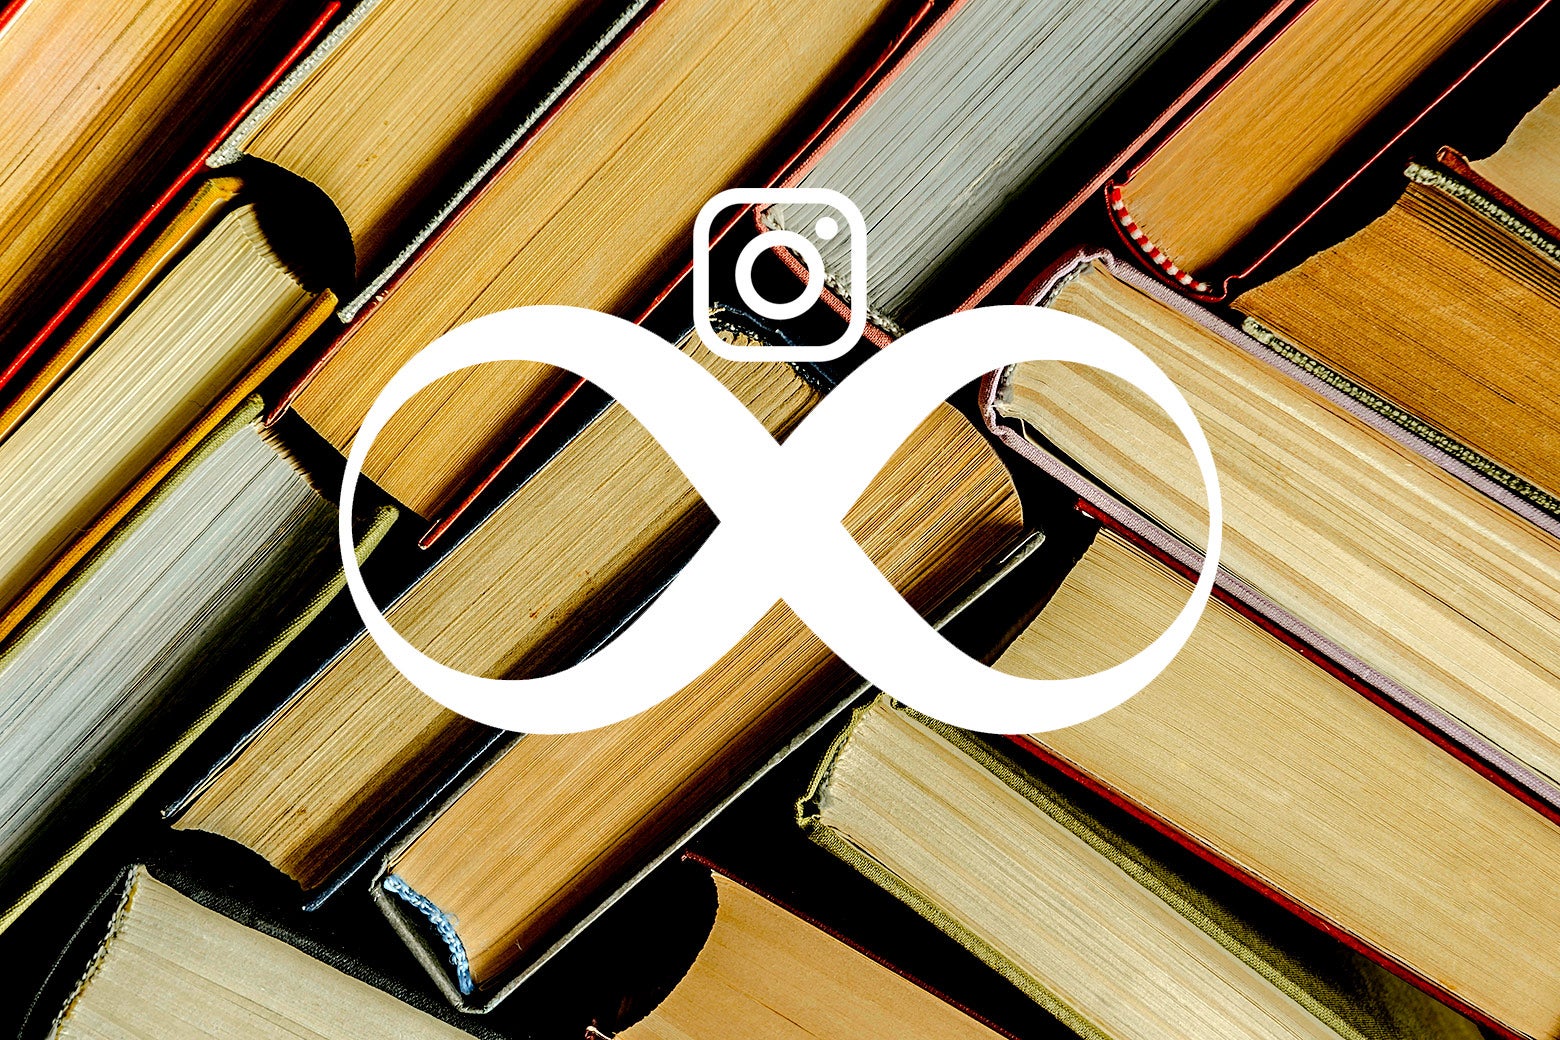 Stock image of several books with the Instagram Stories logo on top.